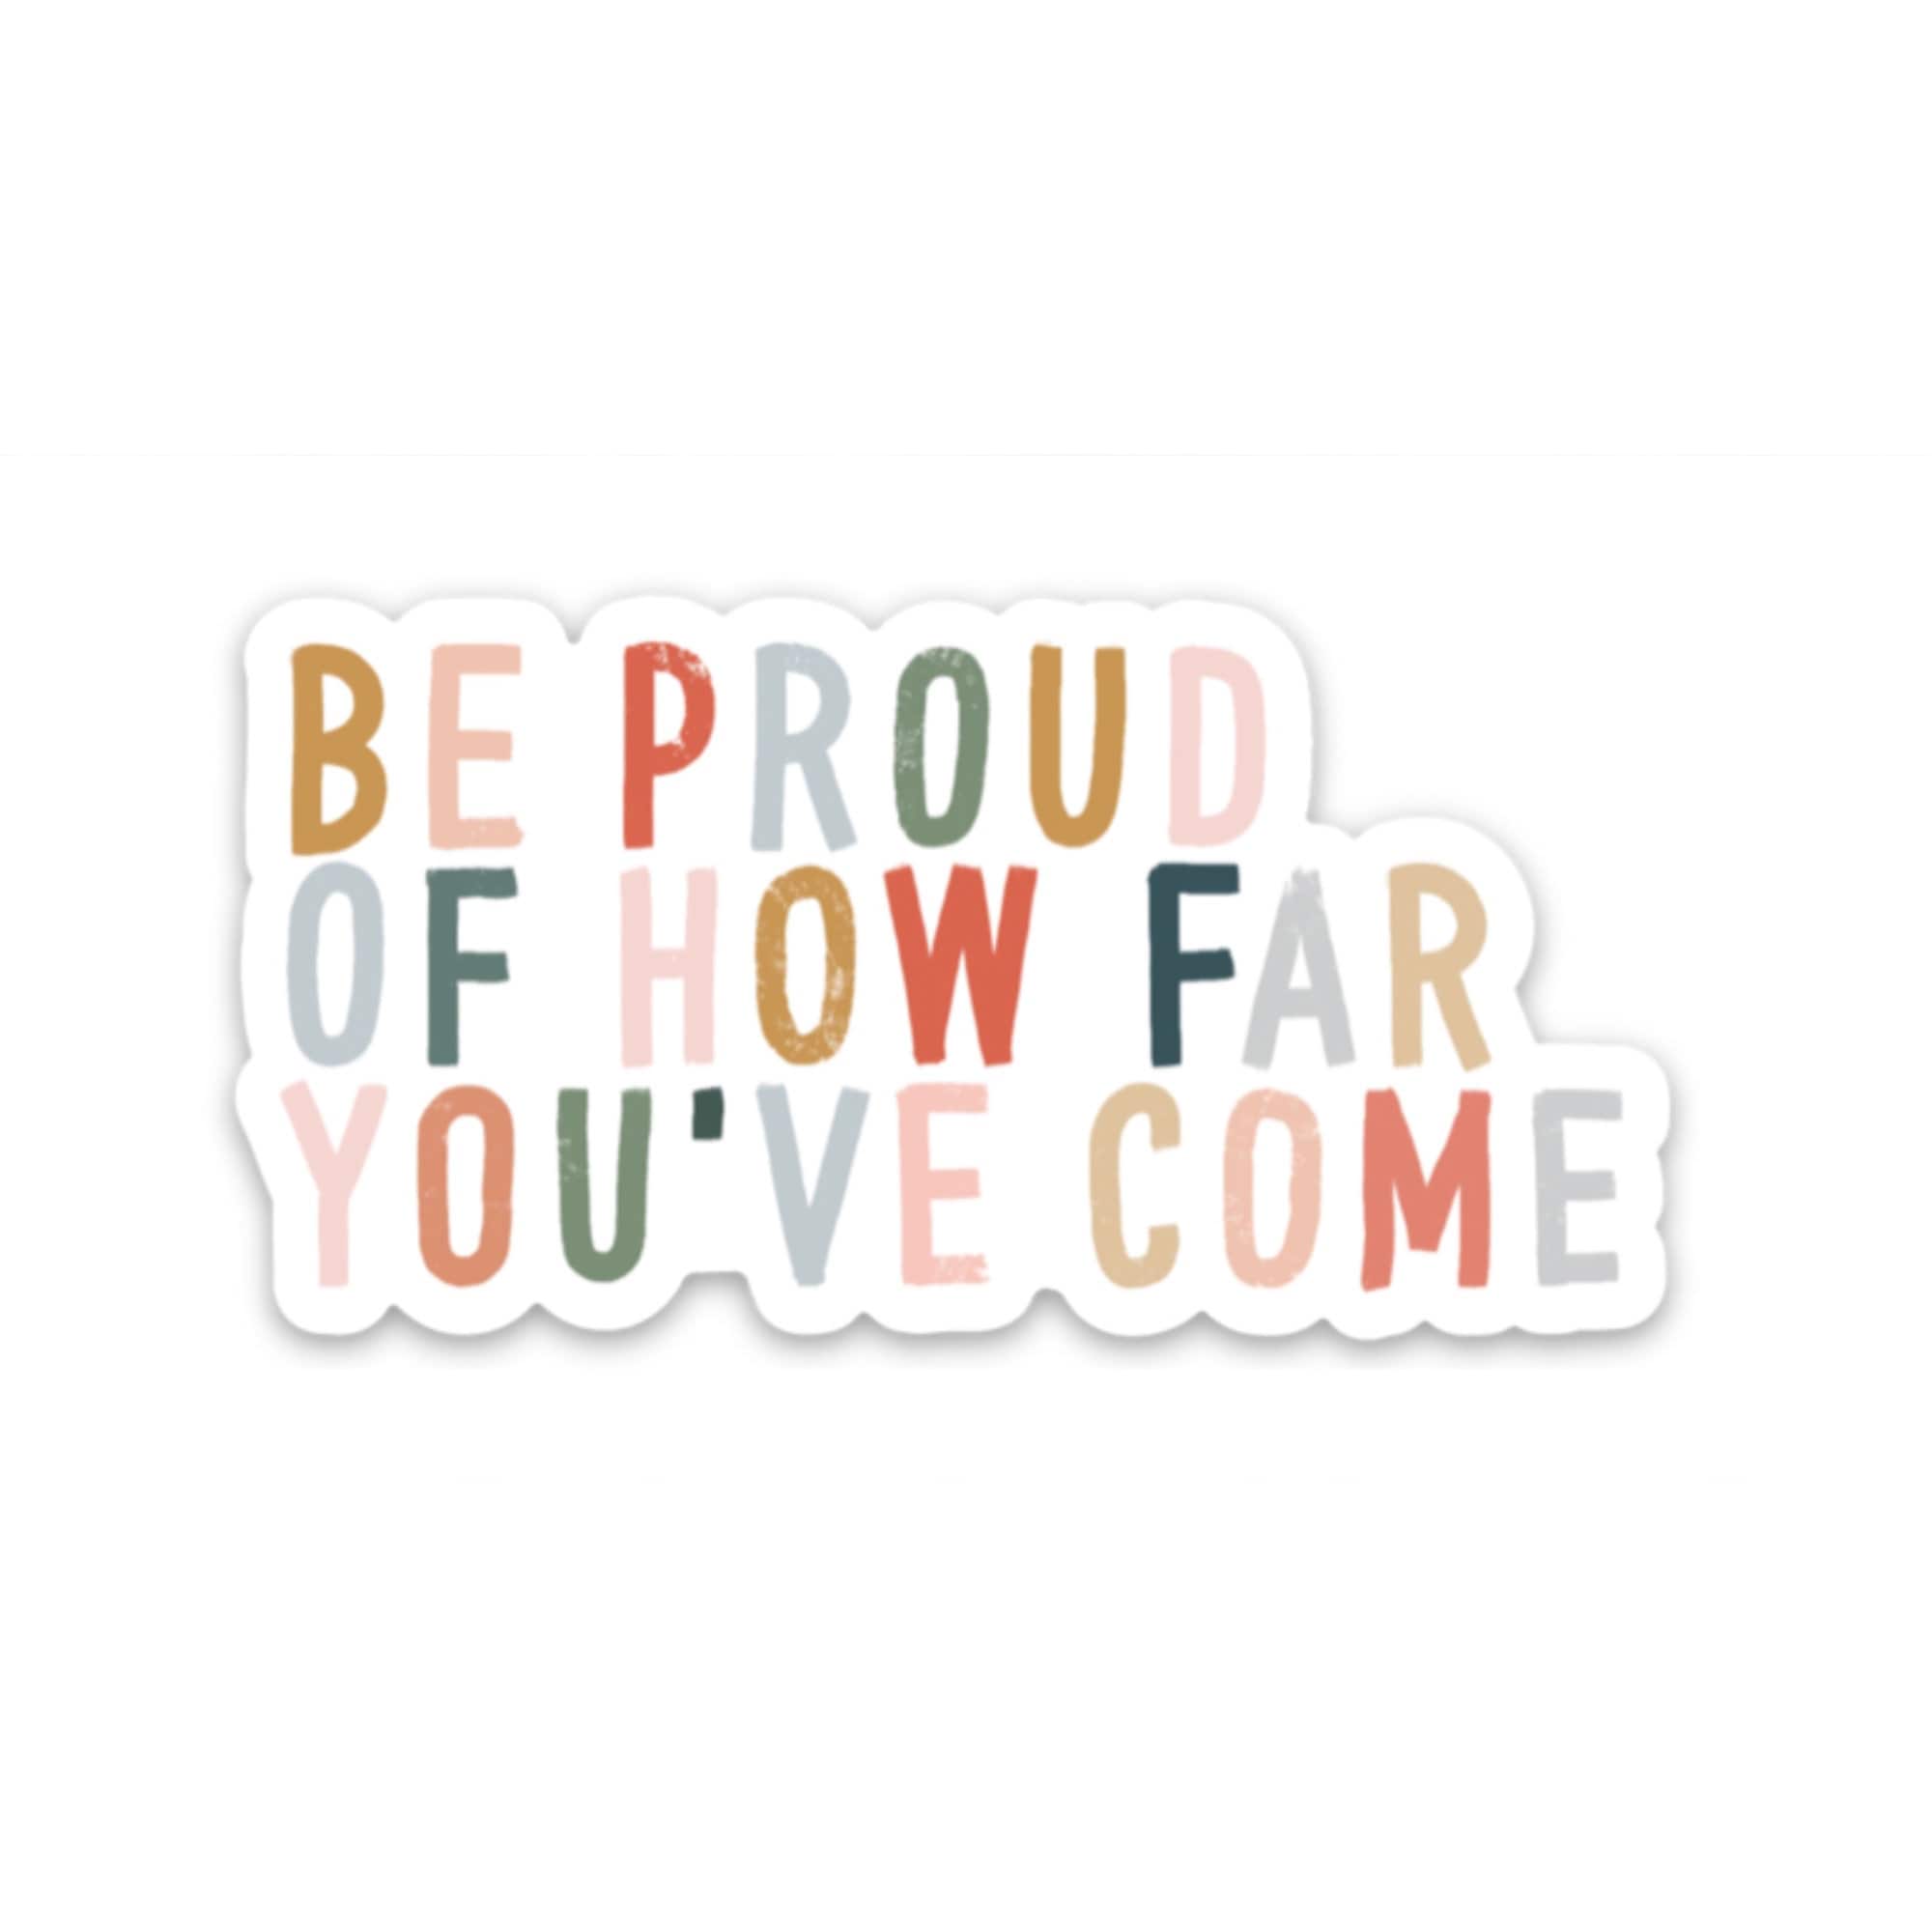 ENCOURAGING STICKERS, MOUNTAIN Vinyl Decal, Don’t Give Up positive Sticker